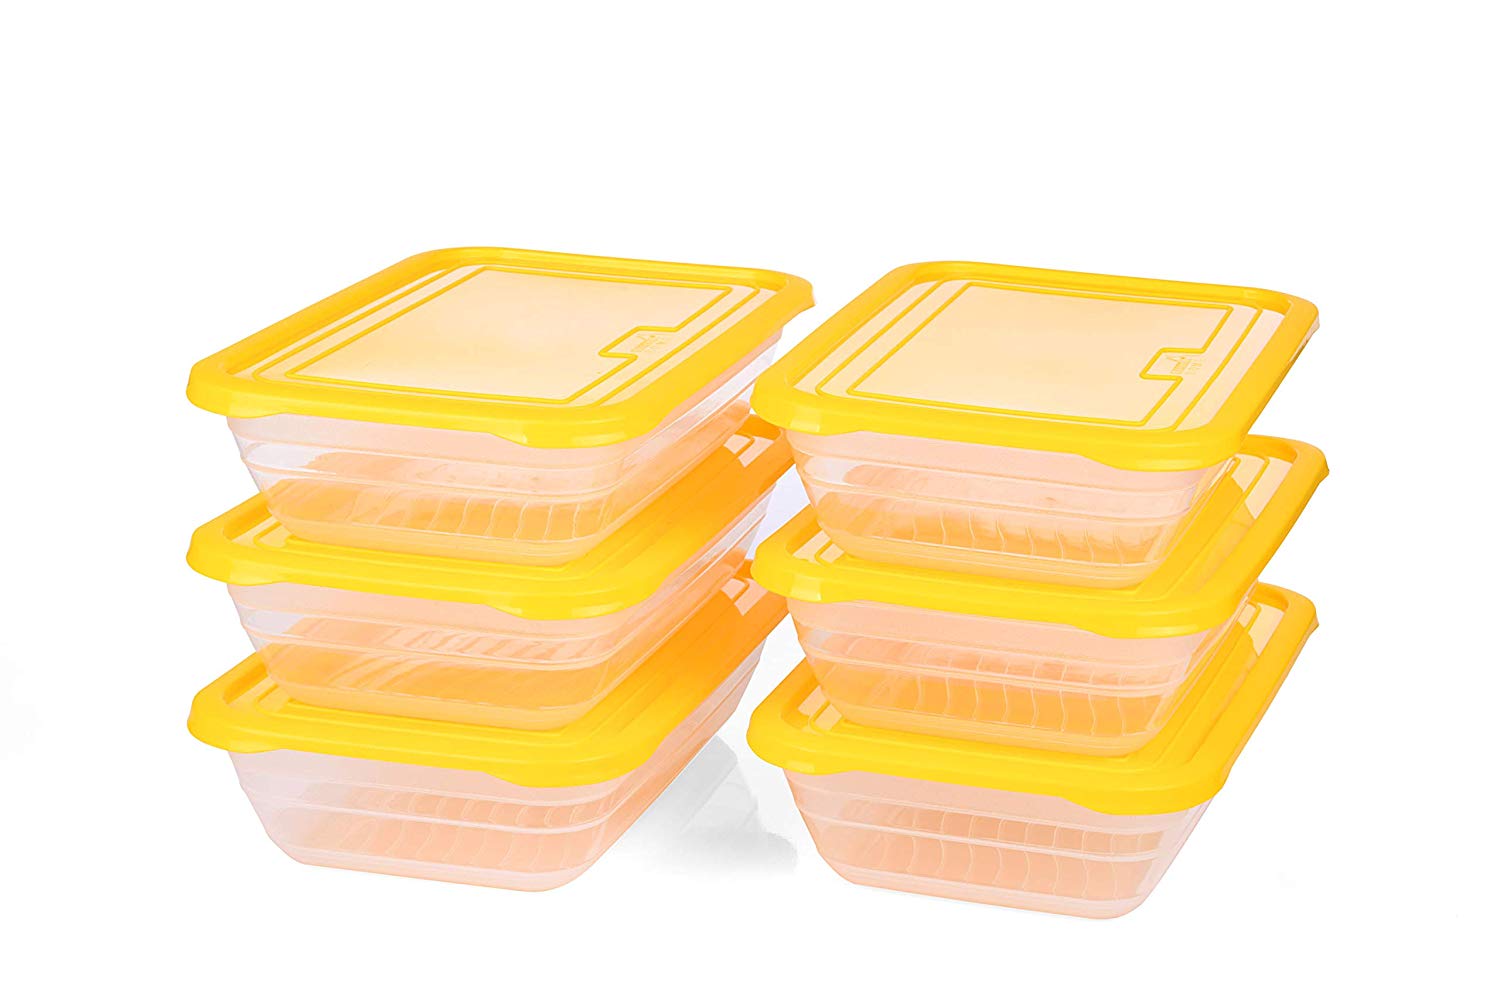 Food Storage Containers (Small 2.3L, 6 Pack)